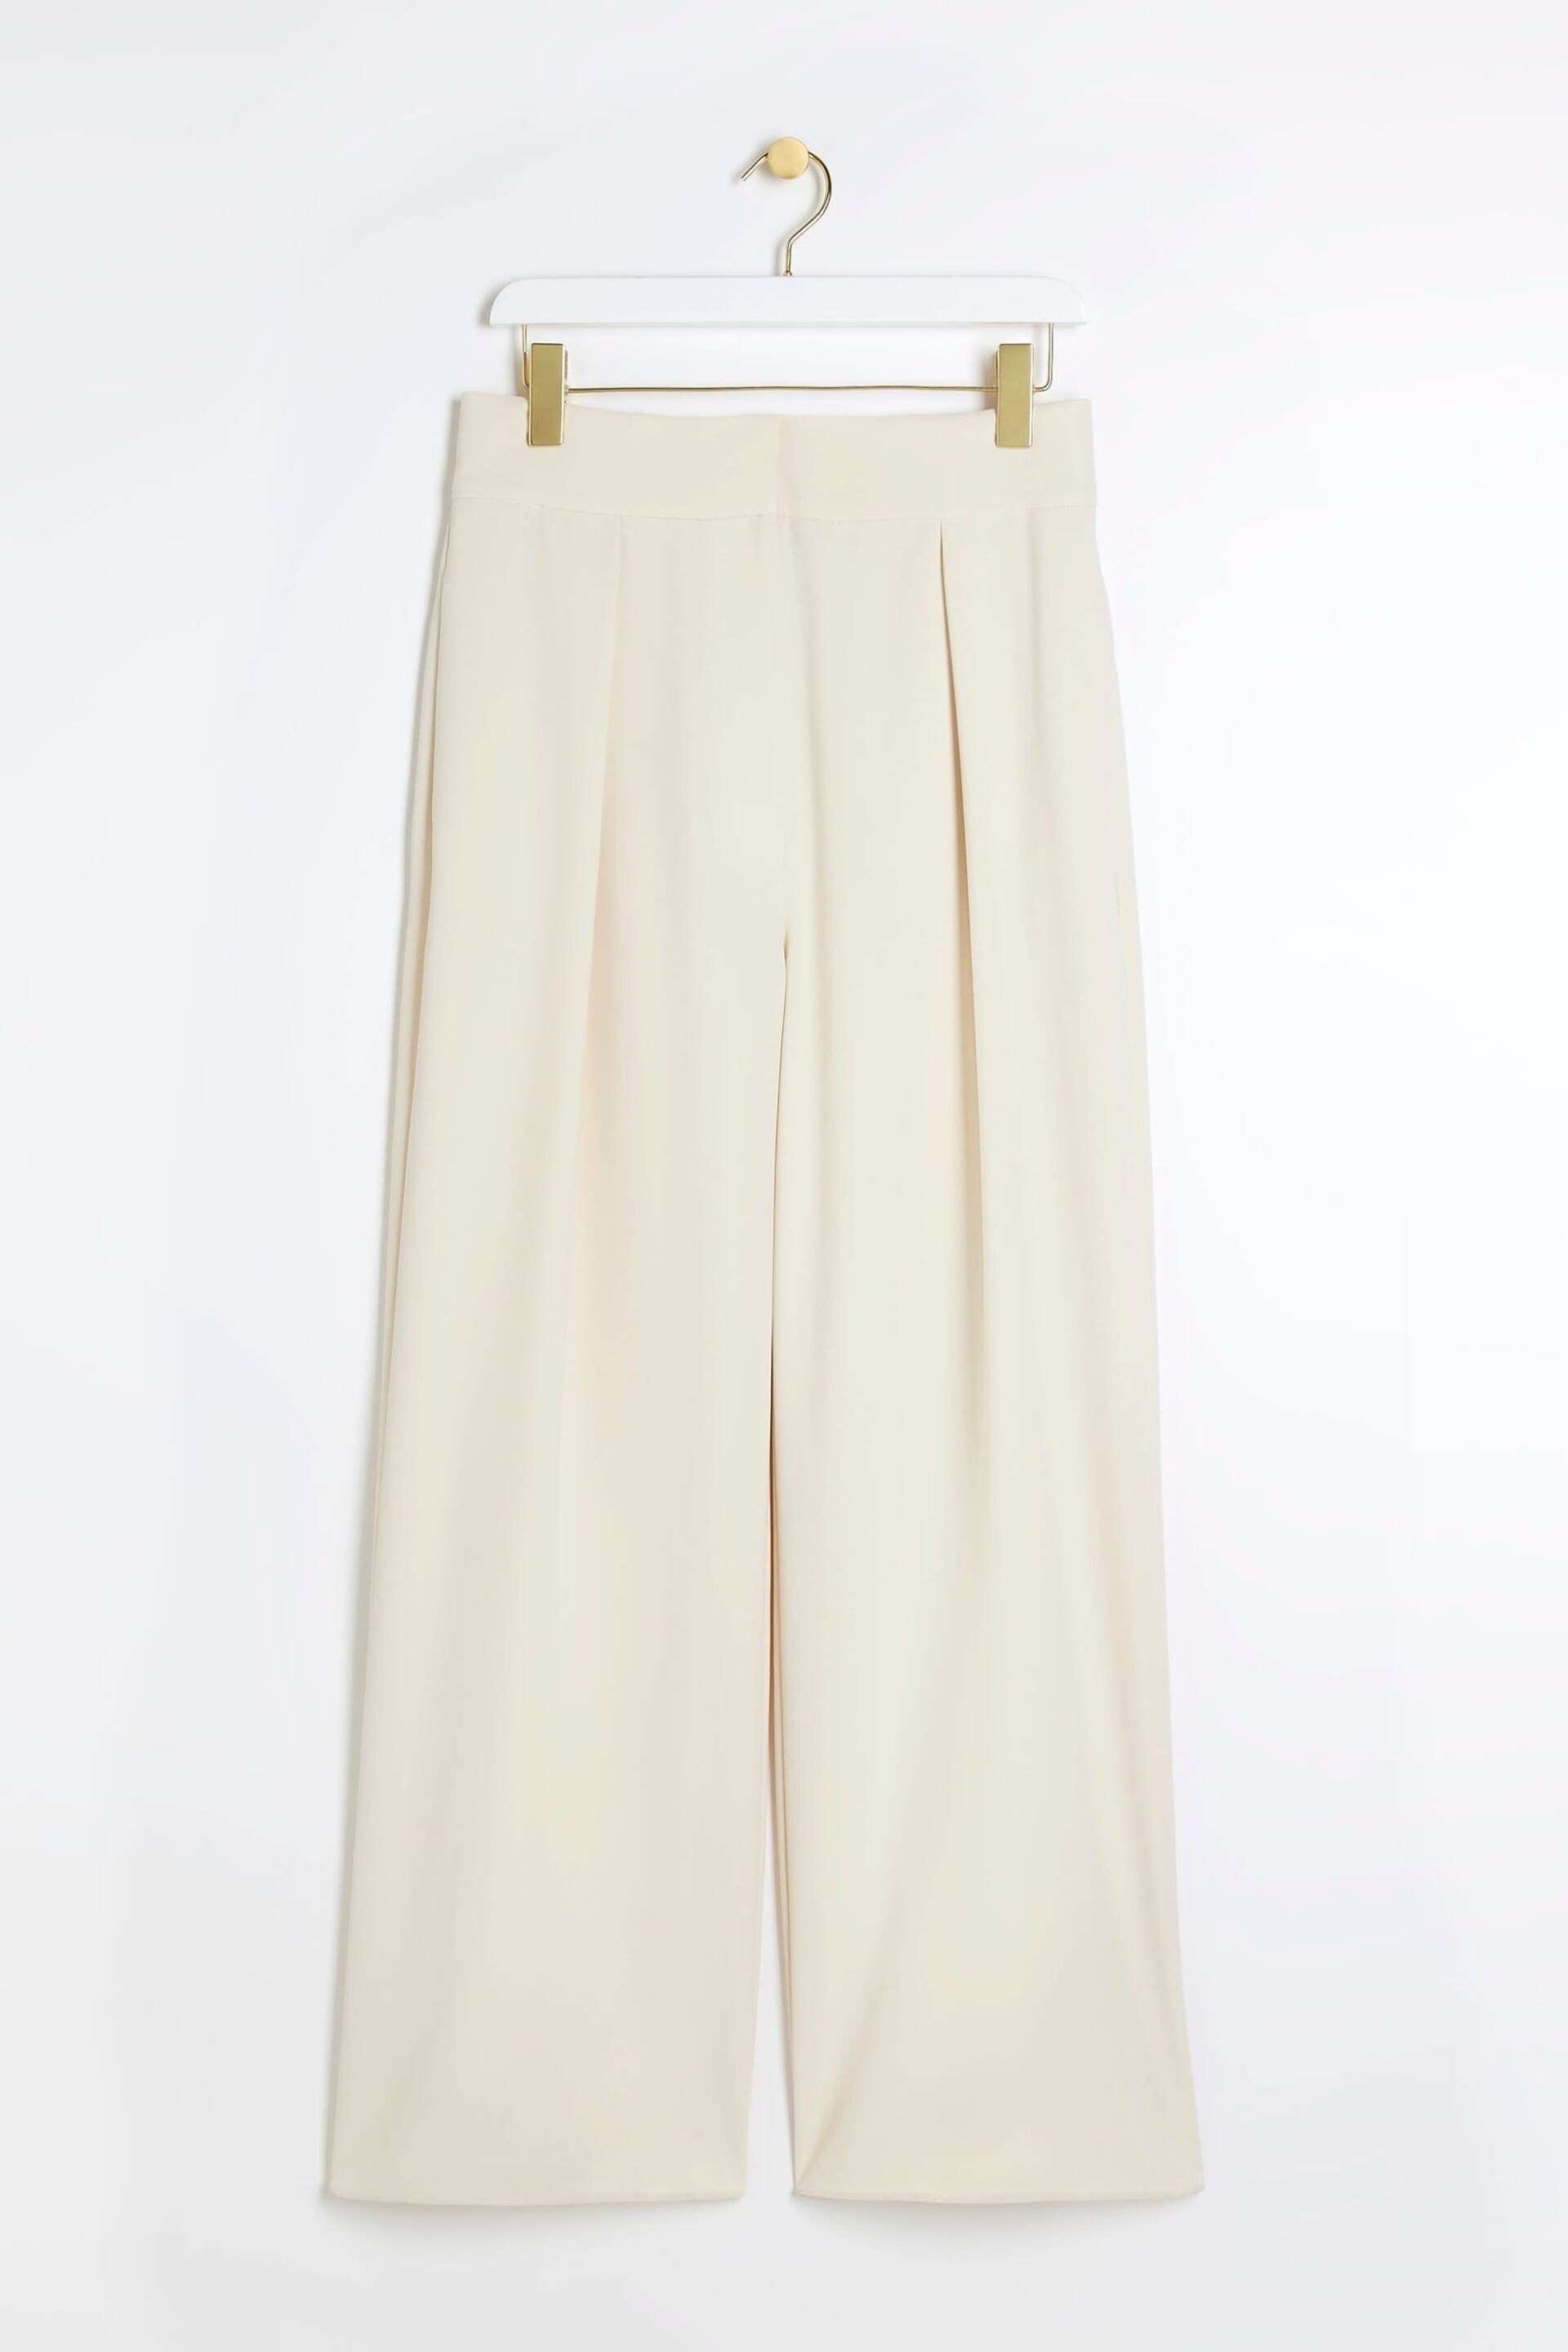 River Island Cream Wide Leg Pleated Clean Trousers - Image 5 of 6